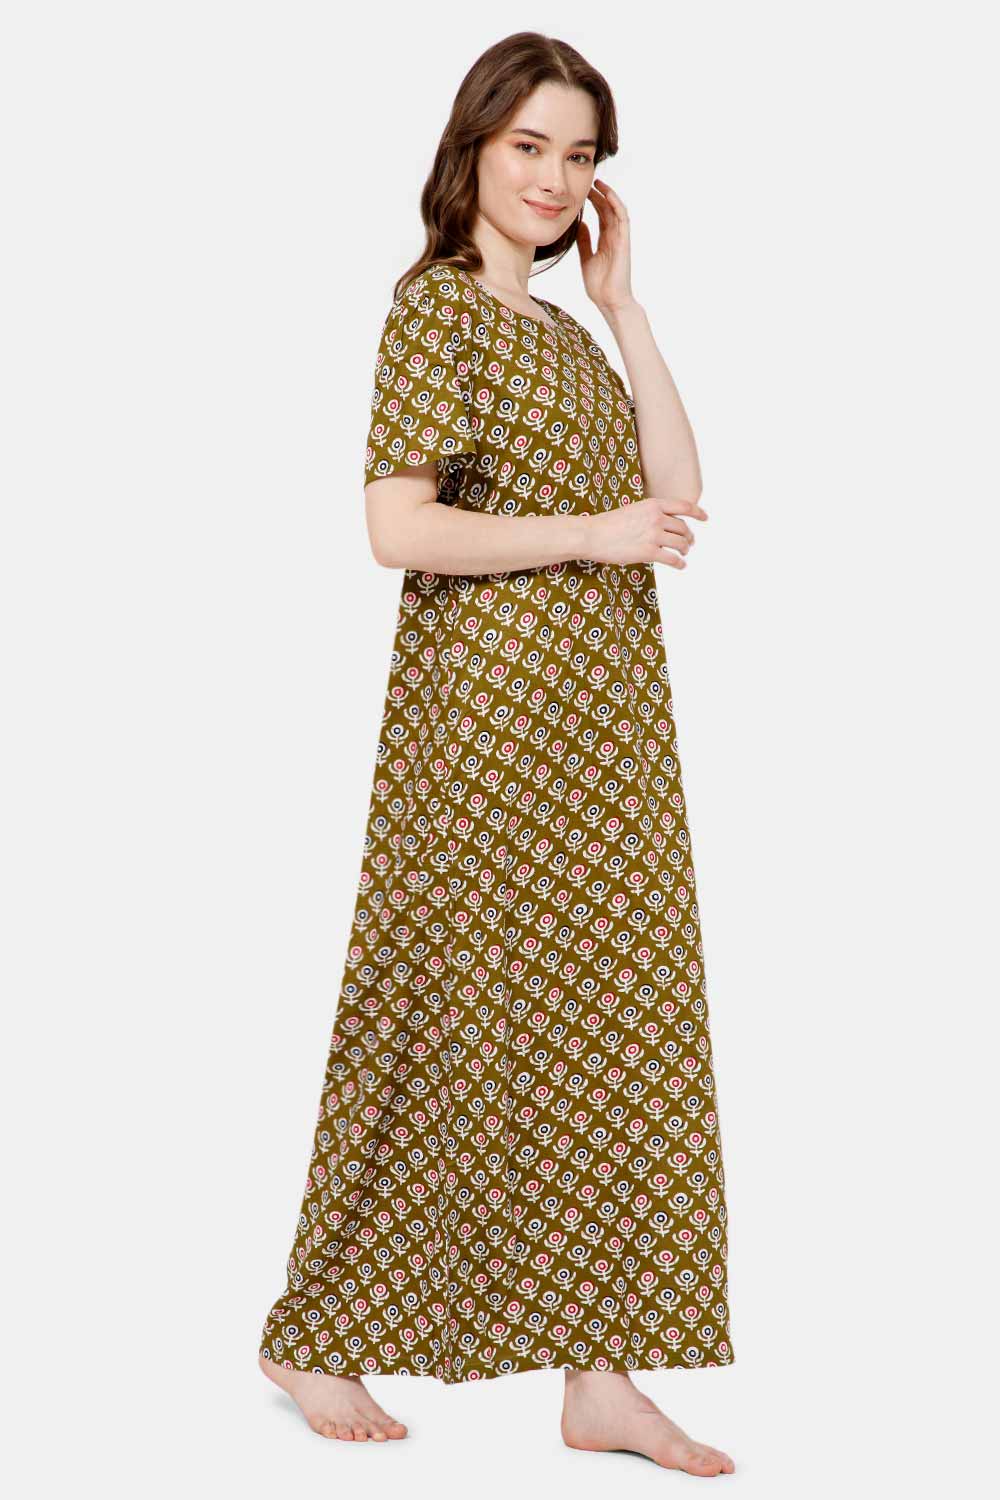 Naidu Hall Printed  Nighty with Square Round Neck - Green - NT36